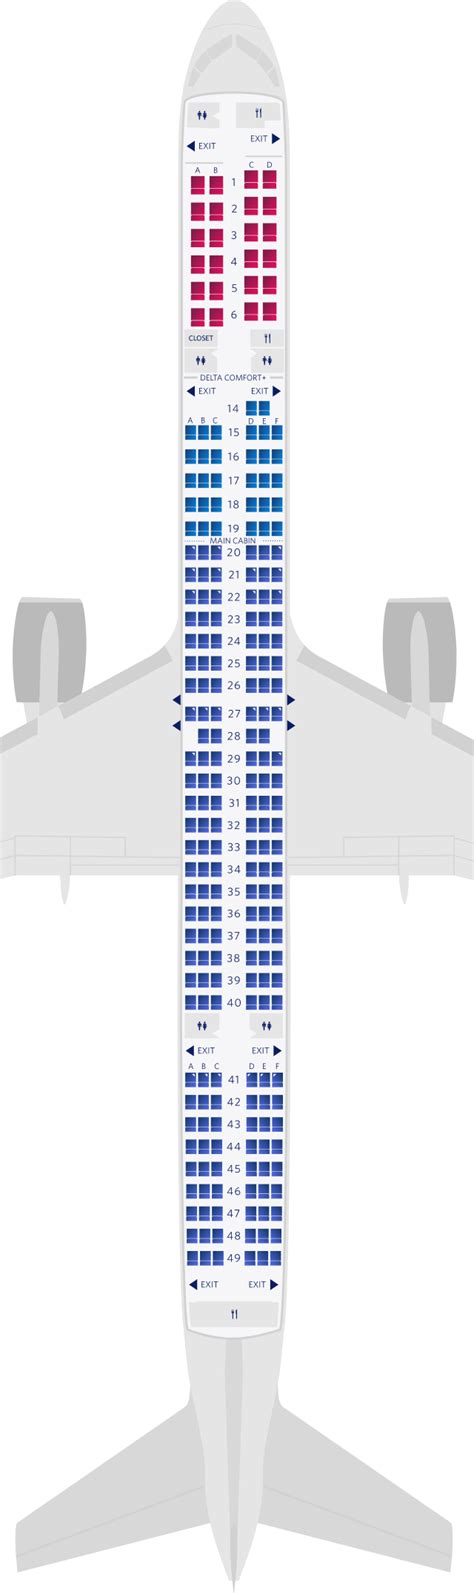 Nov 23, 2019 · Yes. Detailed seat map Delta Air Lines Boeing B757 300 (75Y). Find the best airplanes seats, information on legroom, recline and in-flight entertainment using our detailed online seating charts. . 